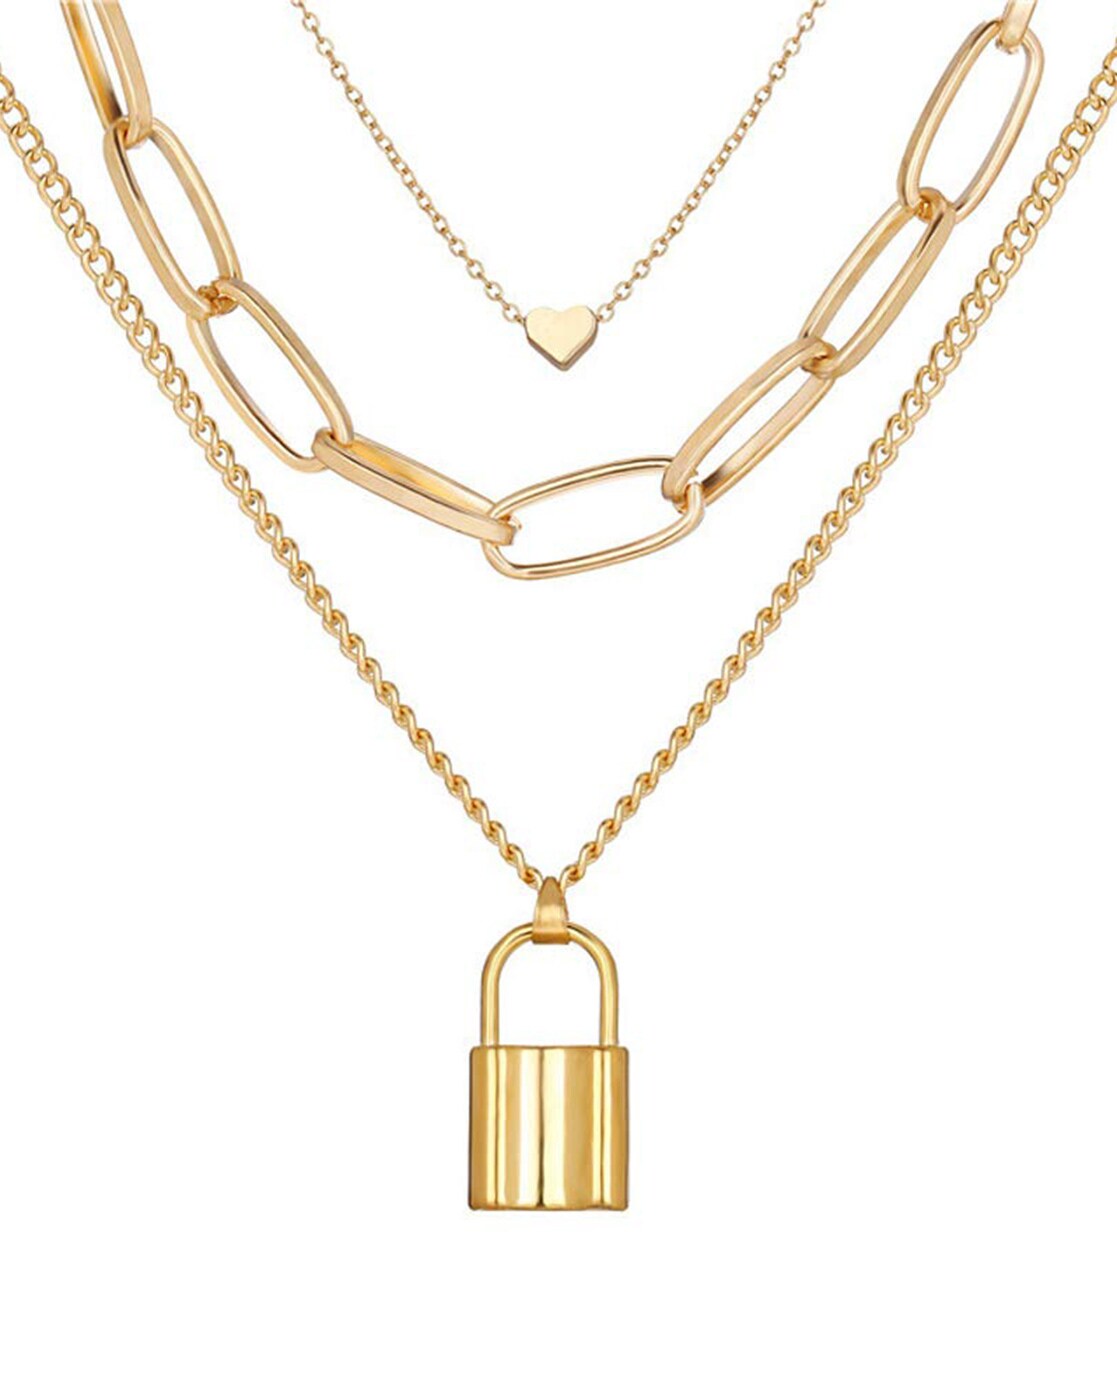 Golden Plated Layered Lock & Key Chain Necklace – beadsnfashion